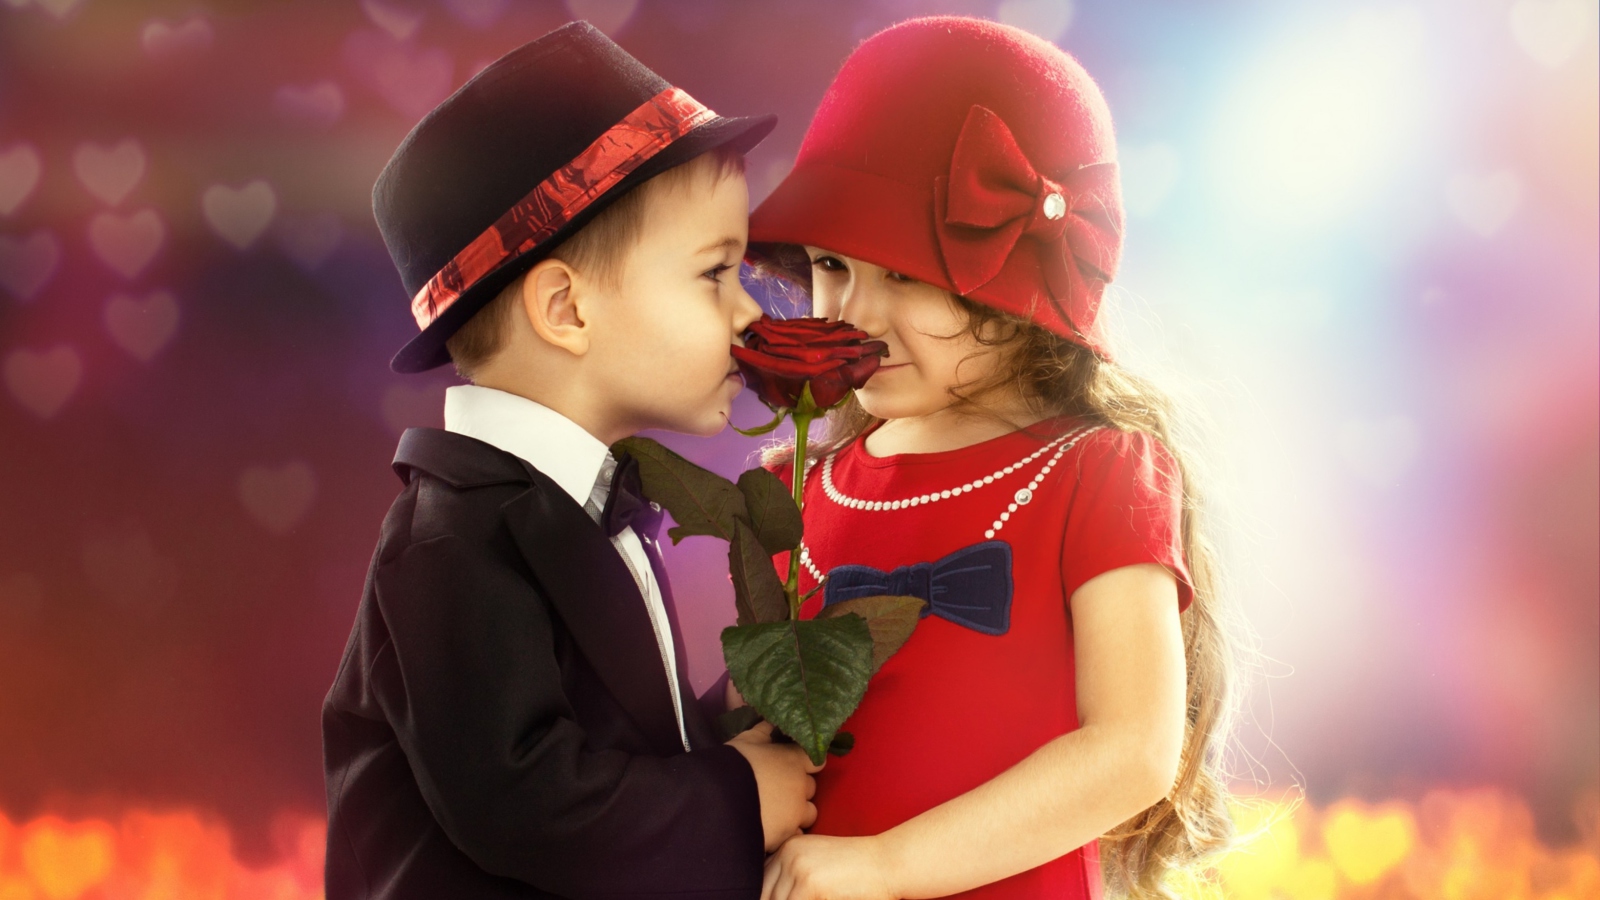 Cute Kids Couple With Rose wallpaper 1600x900